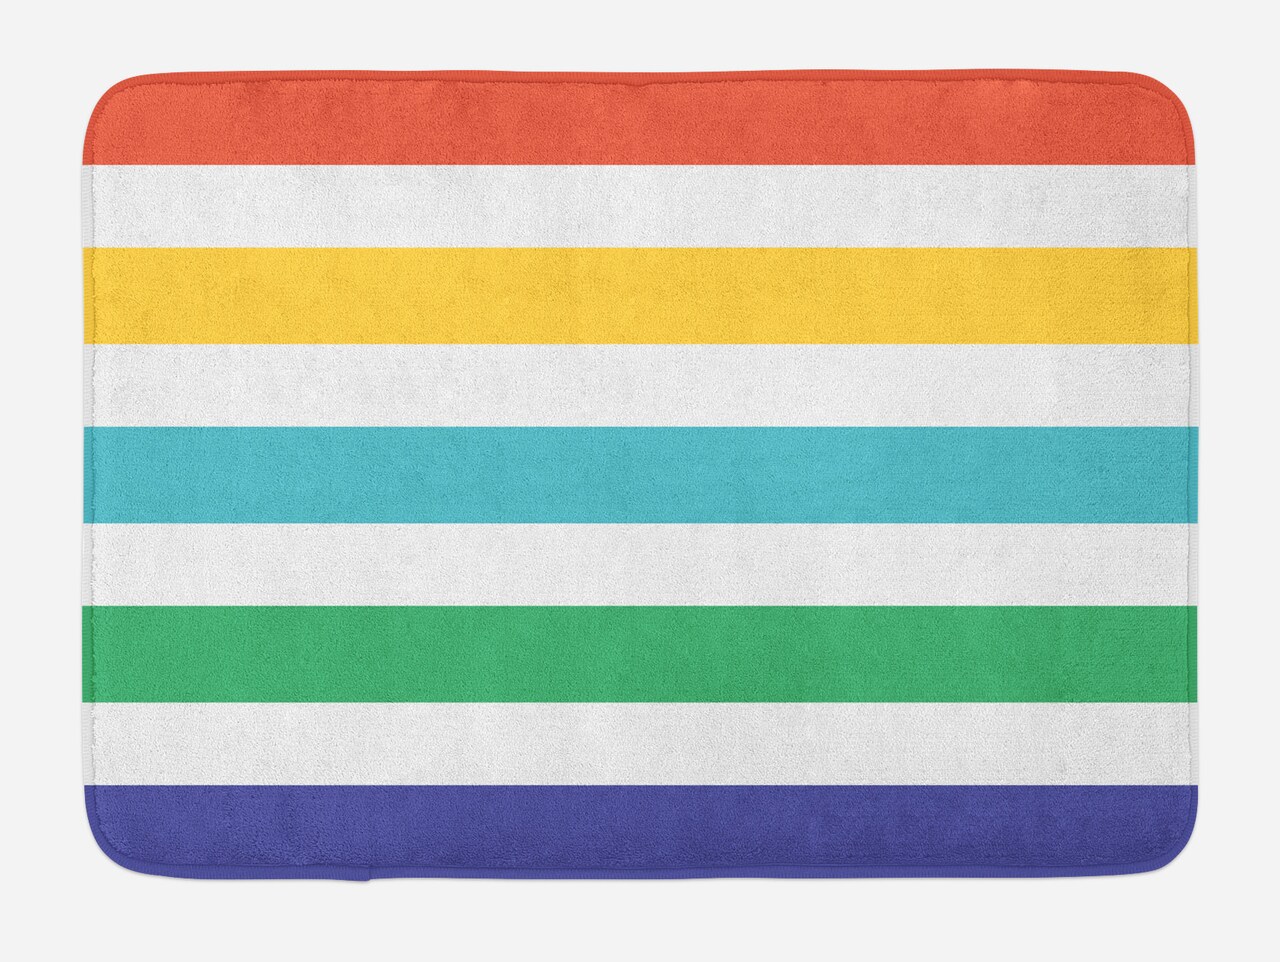 Ambesonne Striped Bath Mat, Rainbow Colored and White Fun Horizontal Lines  Kids Room Red Yellow Blue Green Art, Plush Bathroom Decor Mat with Non Slip  Backing, 29.5 X 17.5, Rainbow Colors